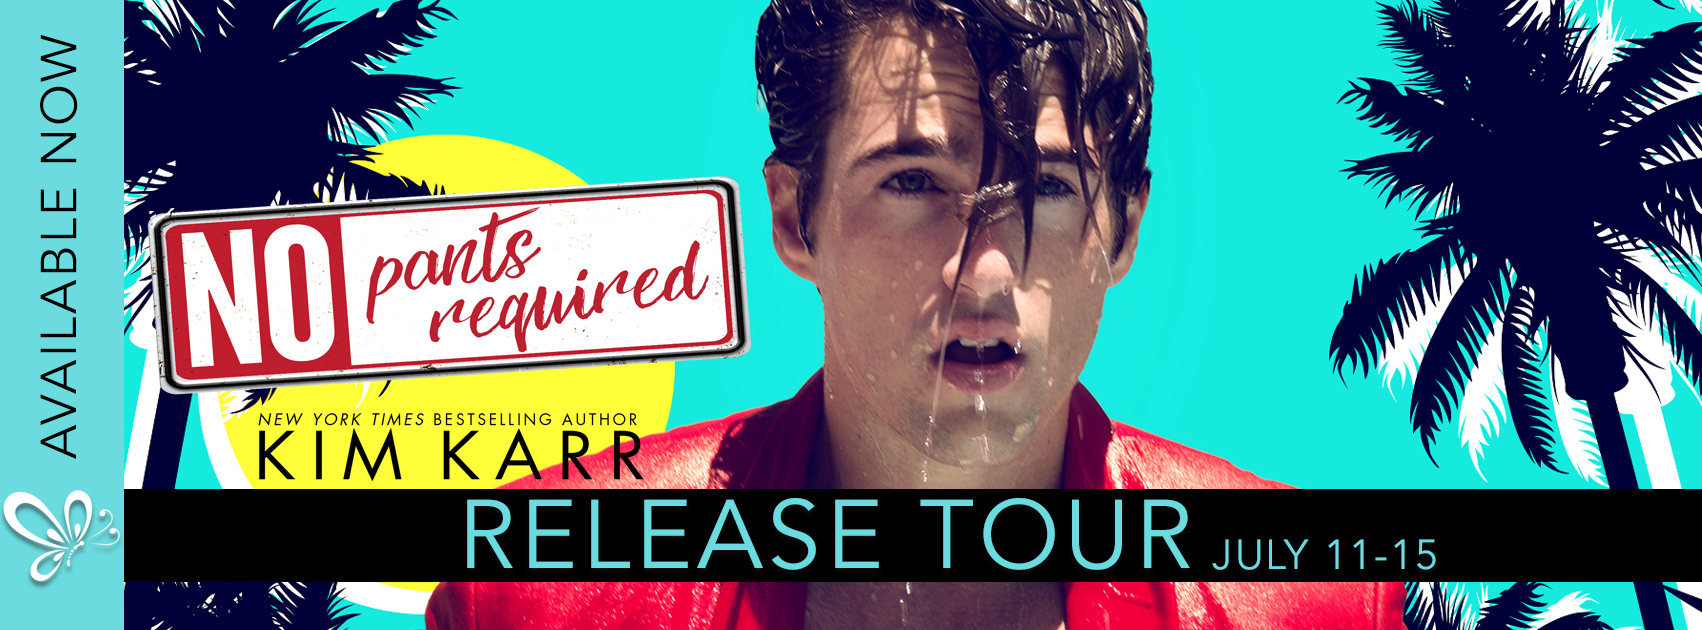 No Pants Required by Kim Karr #ReleaseBlitz #Review #5Stars